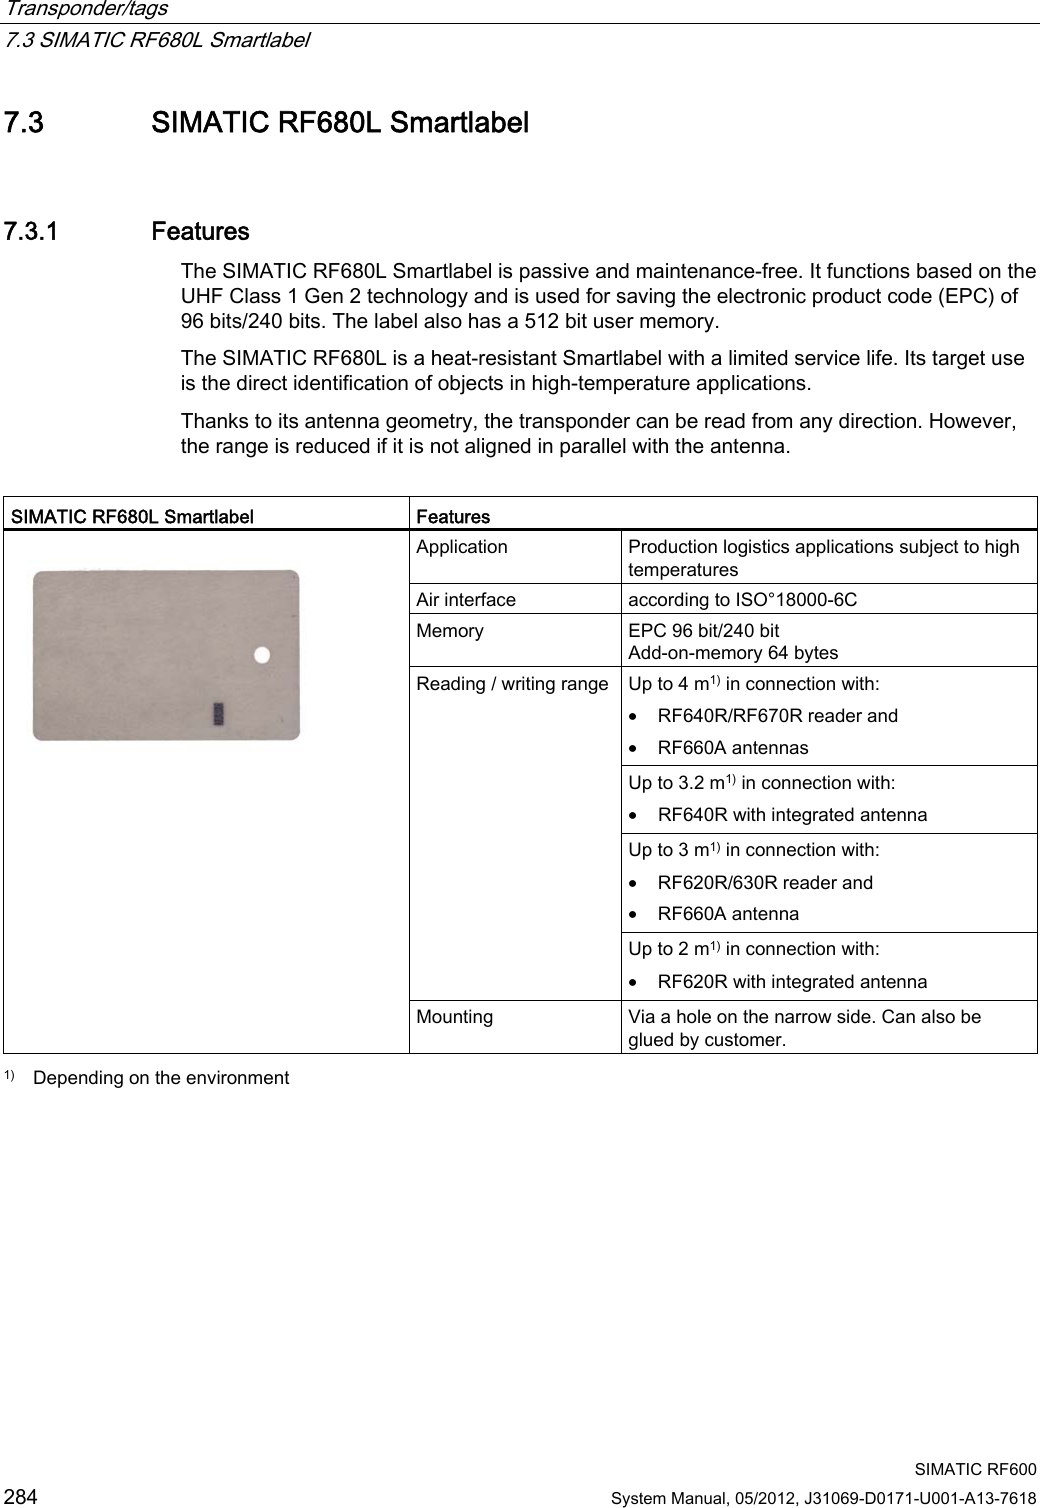 Transponder/tags   7.3 SIMATIC RF680L Smartlabel  SIMATIC RF600 284 System Manual, 05/2012, J31069-D0171-U001-A13-7618 7.3 SIMATIC RF680L Smartlabel 7.3.1 Features The SIMATIC RF680L Smartlabel is passive and maintenance-free. It functions based on the UHF Class 1 Gen 2 technology and is used for saving the electronic product code (EPC) of 96 bits/240 bits. The label also has a 512 bit user memory. The SIMATIC RF680L is a heat-resistant Smartlabel with a limited service life. Its target use is the direct identification of objects in high-temperature applications. Thanks to its antenna geometry, the transponder can be read from any direction. However, the range is reduced if it is not aligned in parallel with the antenna.  SIMATIC RF680L Smartlabel  Features Application  Production logistics applications subject to high temperatures Air interface  according to ISO°18000-6C Memory  EPC 96 bit/240 bit Add-on-memory 64 bytes Up to 4 m1) in connection with: • RF640R/RF670R reader and • RF660A antennas Up to 3.2 m1) in connection with: • RF640R with integrated antenna Up to 3 m1) in connection with: • RF620R/630R reader and • RF660A antenna Reading / writing range Up to 2 m1) in connection with: • RF620R with integrated antenna  Mounting  Via a hole on the narrow side. Can also be glued by customer.  1)  Depending on the environment 